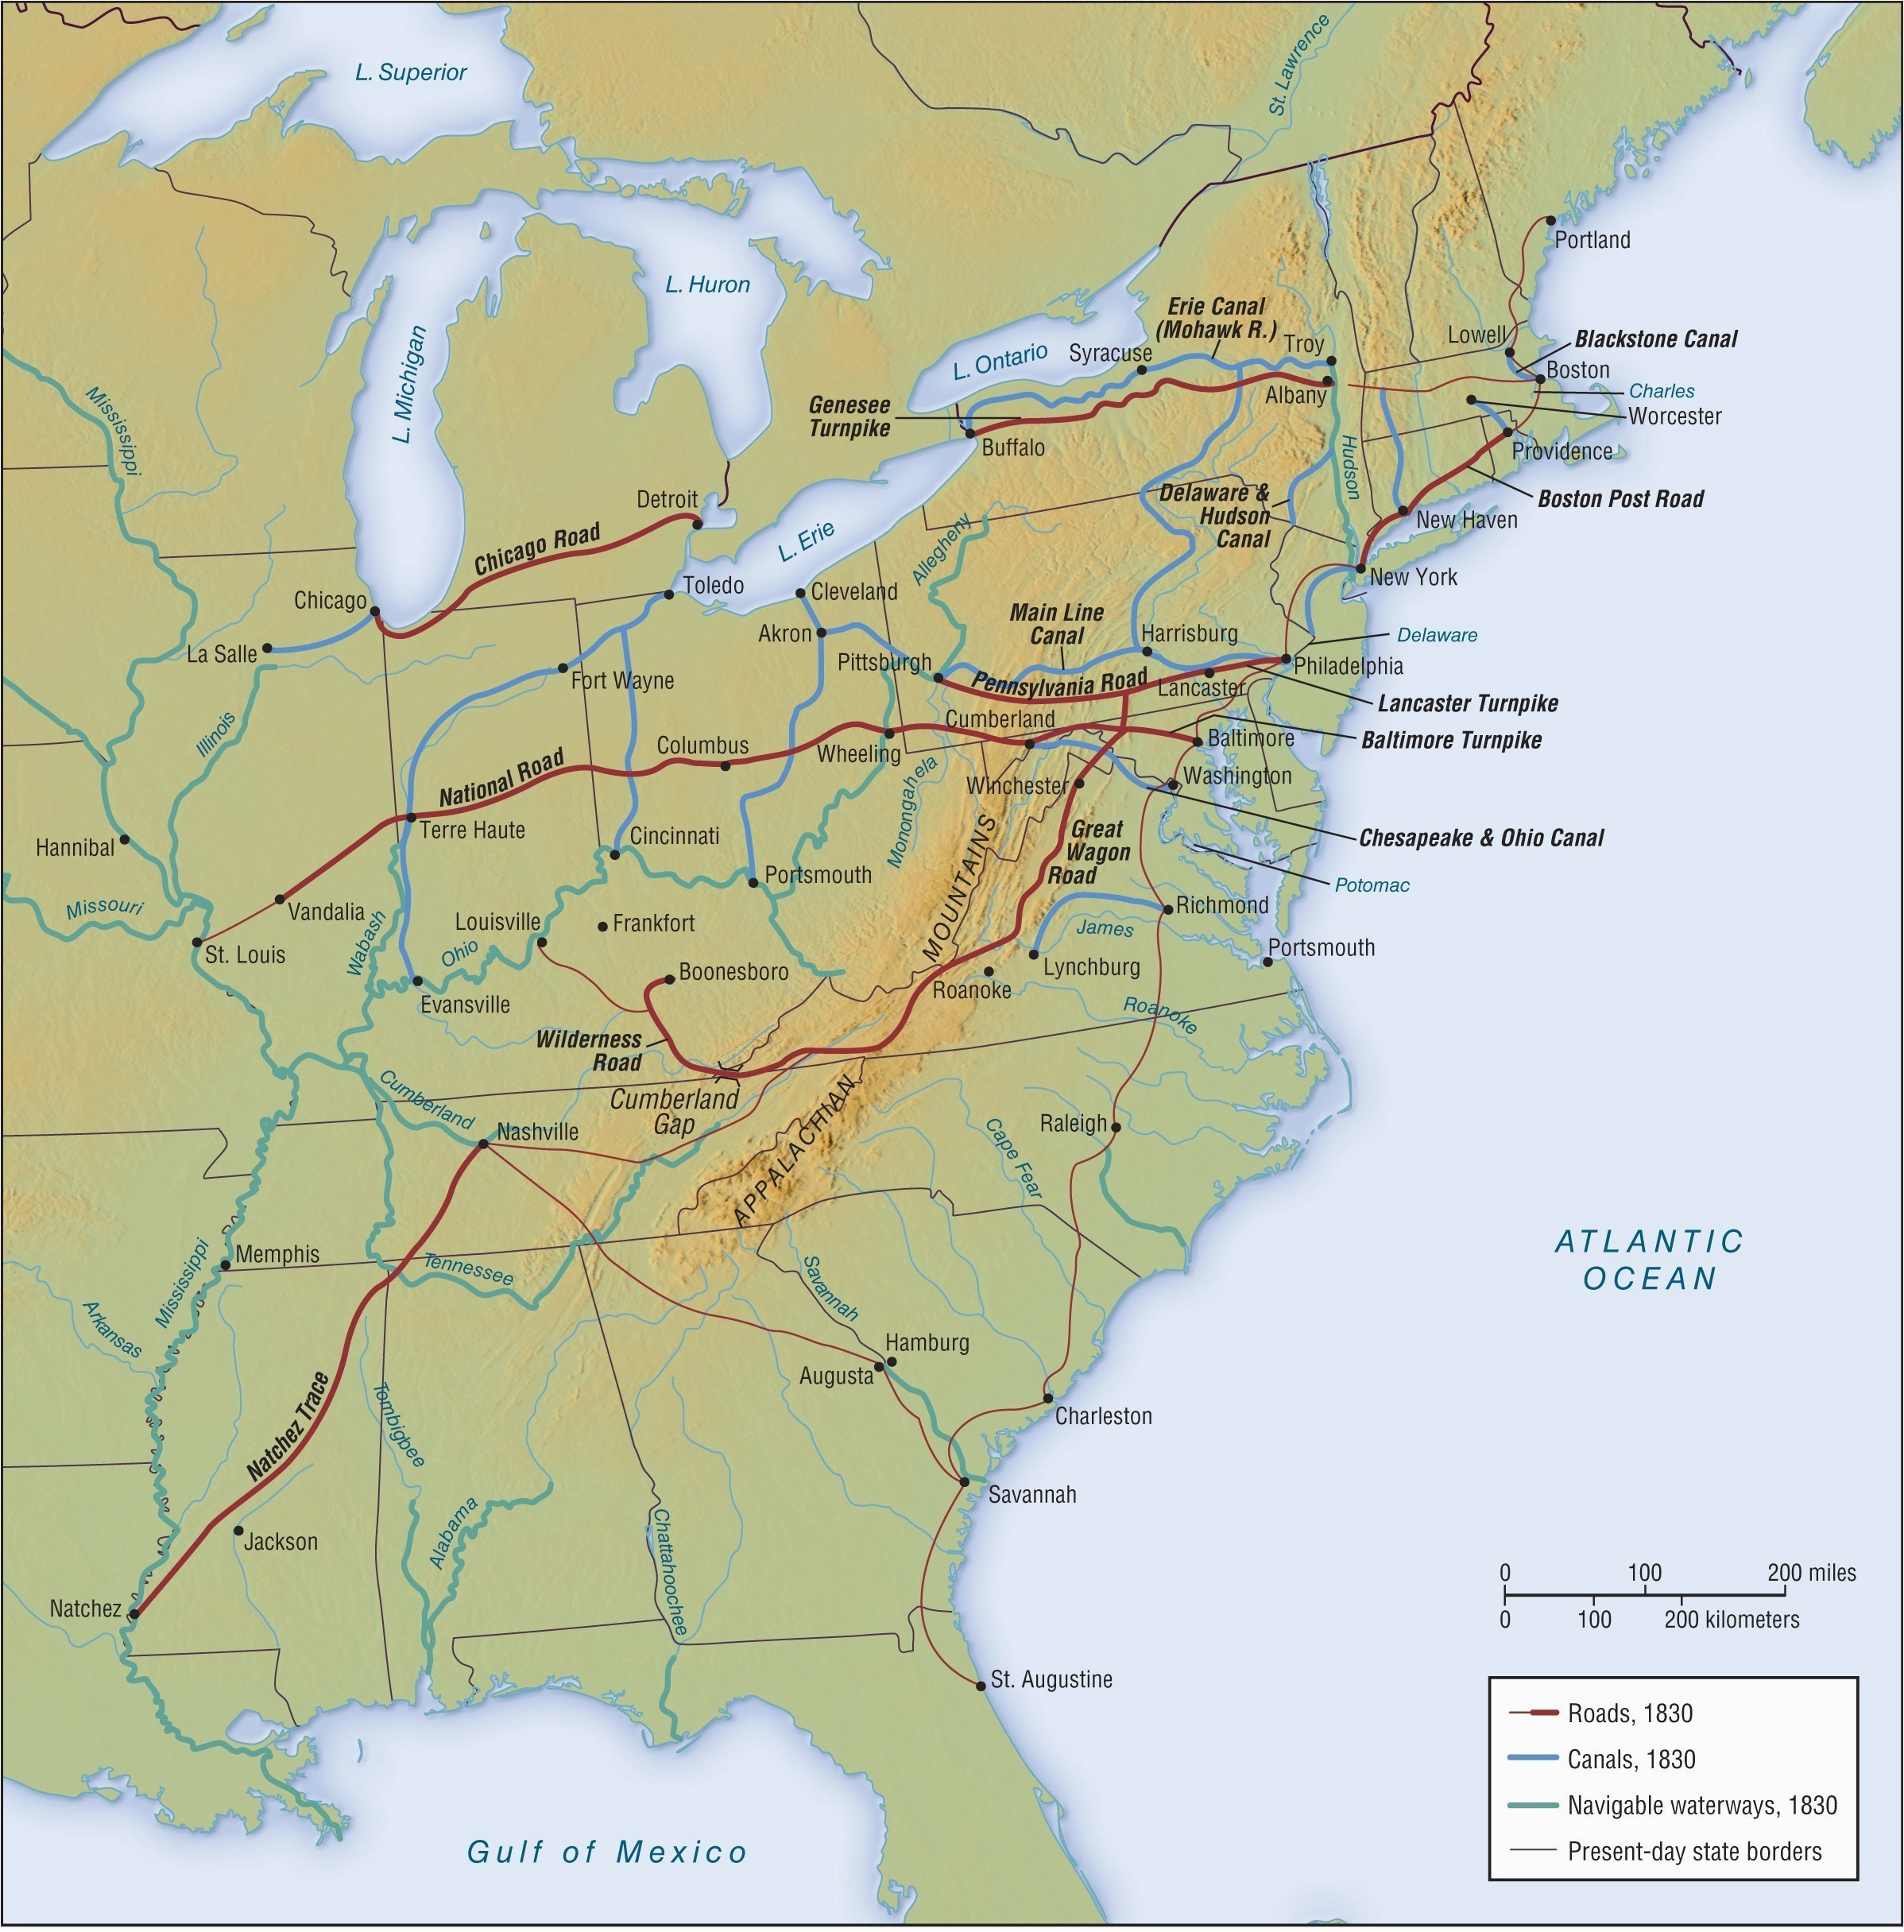 unique ohio and erie canal map of us appalachia clanrobot com